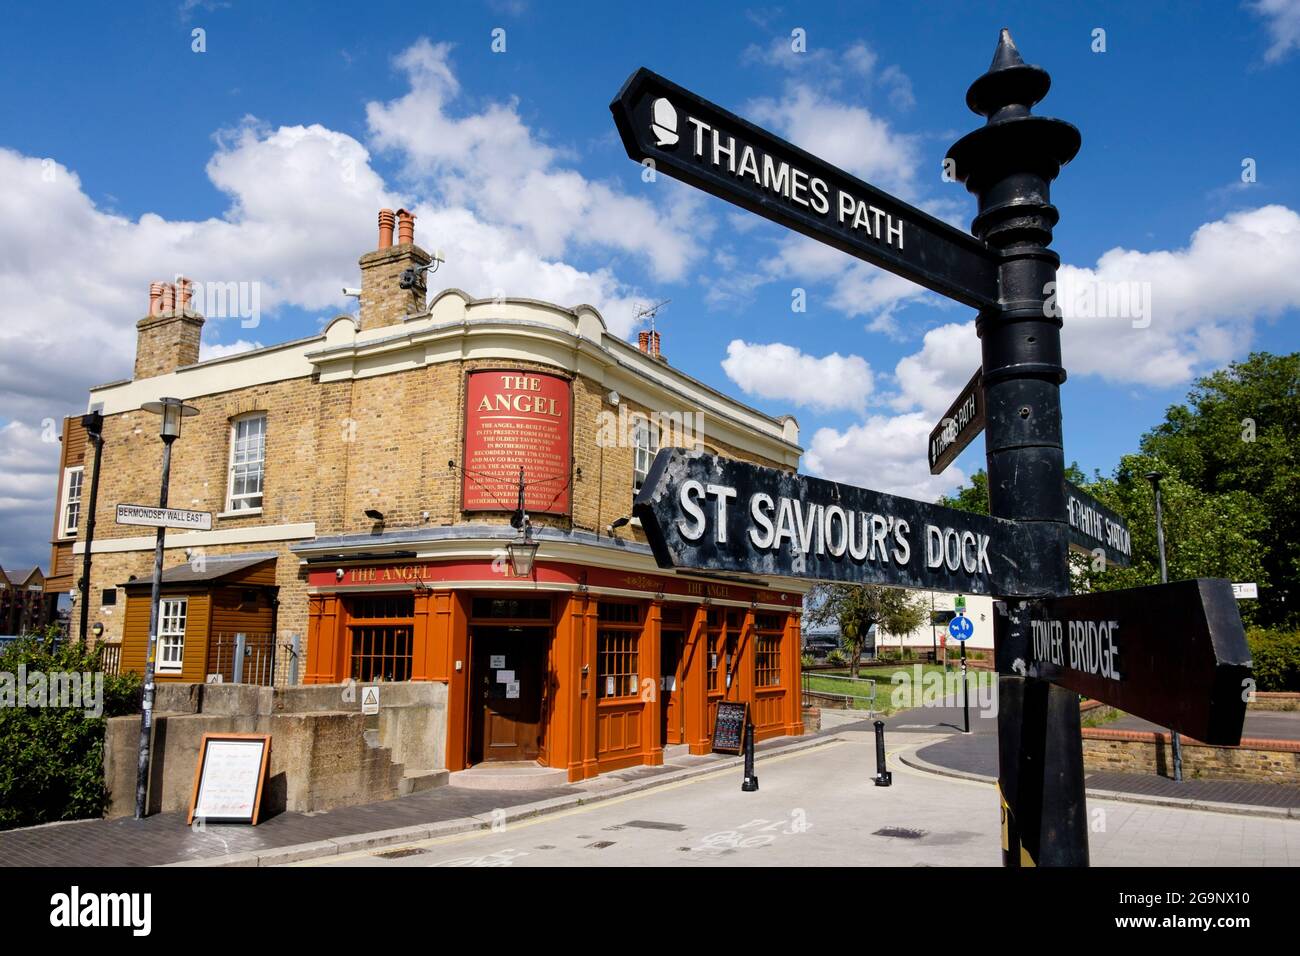 The Angel Historic Riverside Pub an der Themse, Rotherhithe, South London, Großbritannien Stockfoto